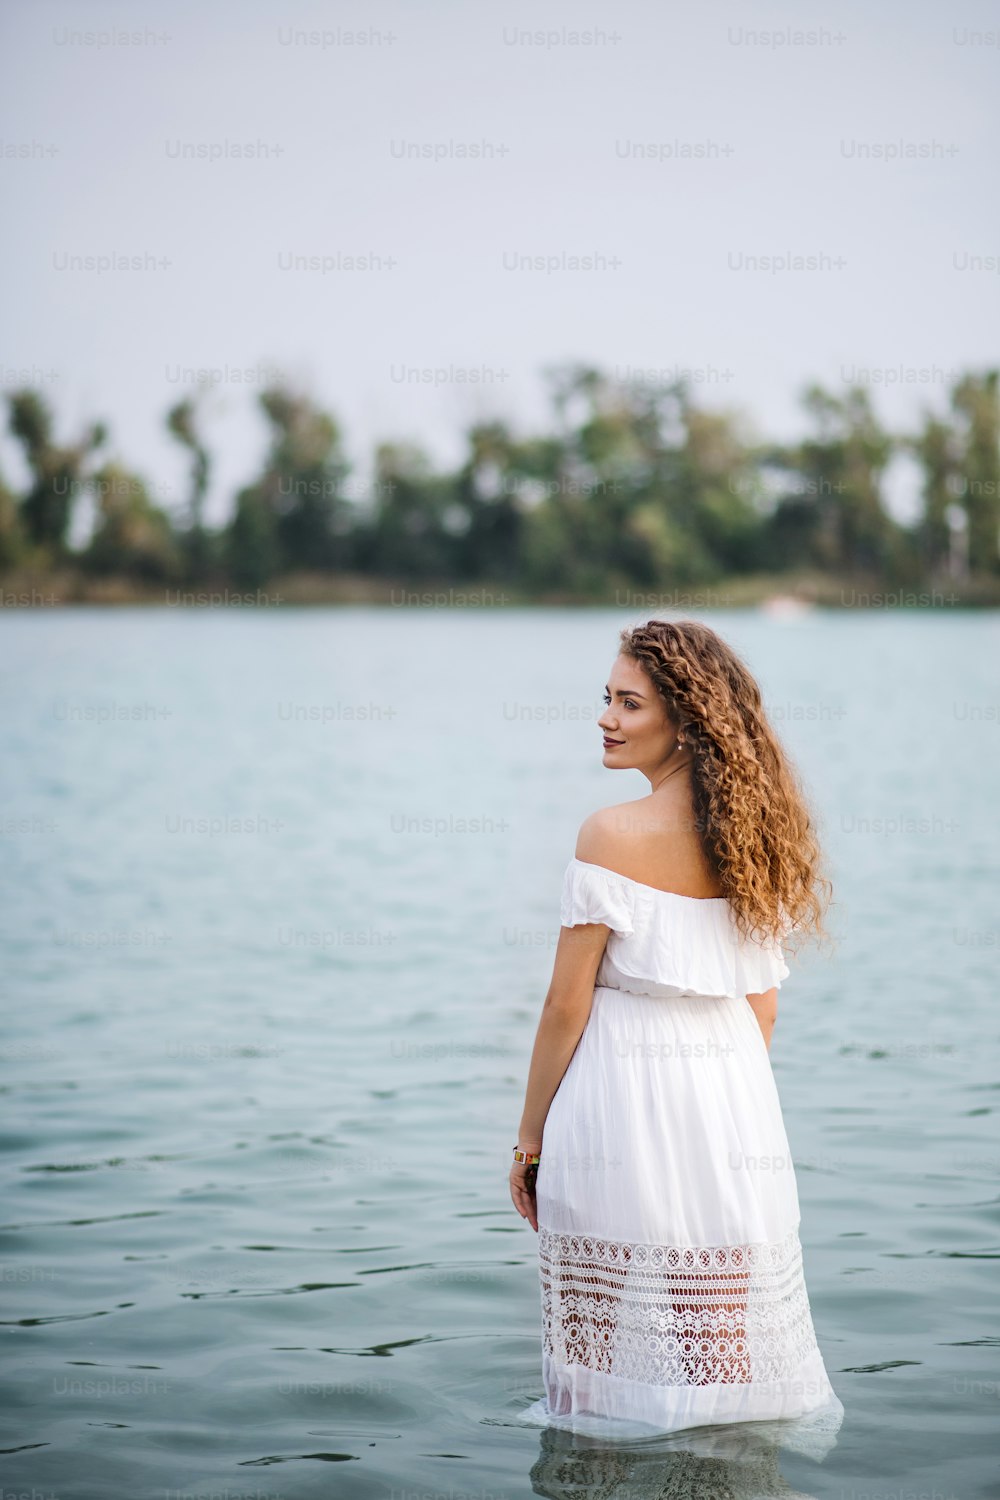 Young woman at summer festival, standing in lake. Copy space.